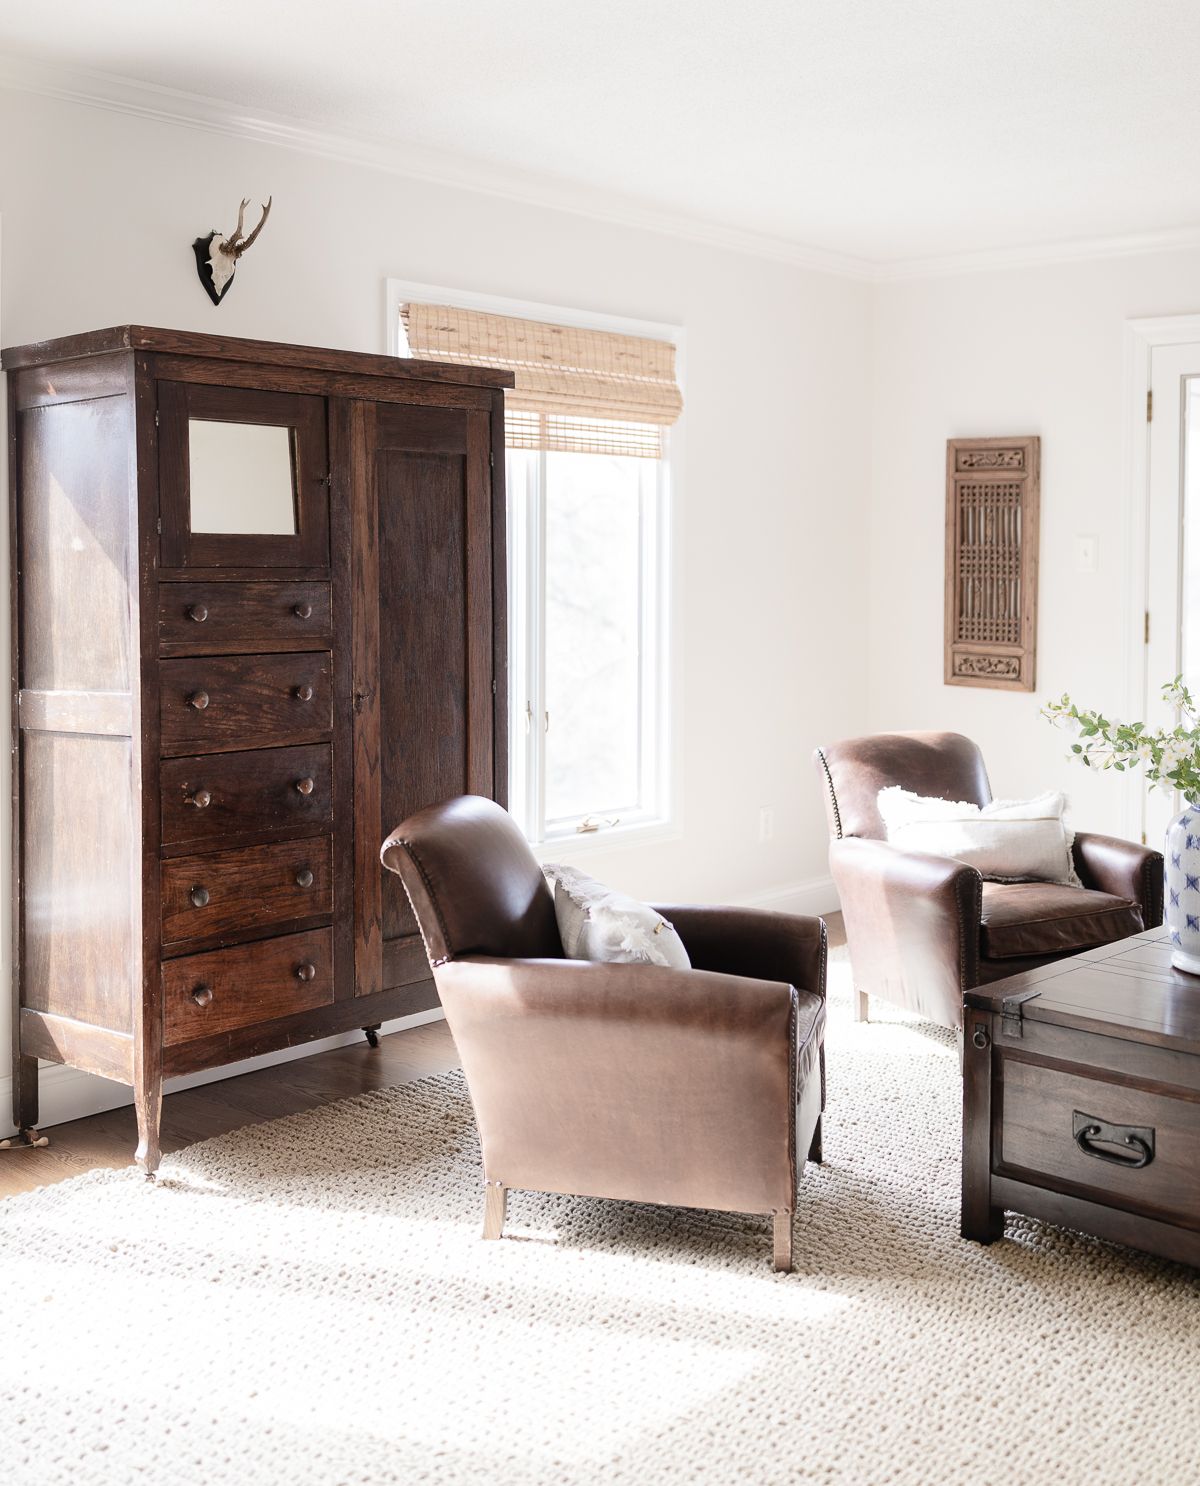 A living room in a cozy home, featuring leather chairs and an antique wood armoire